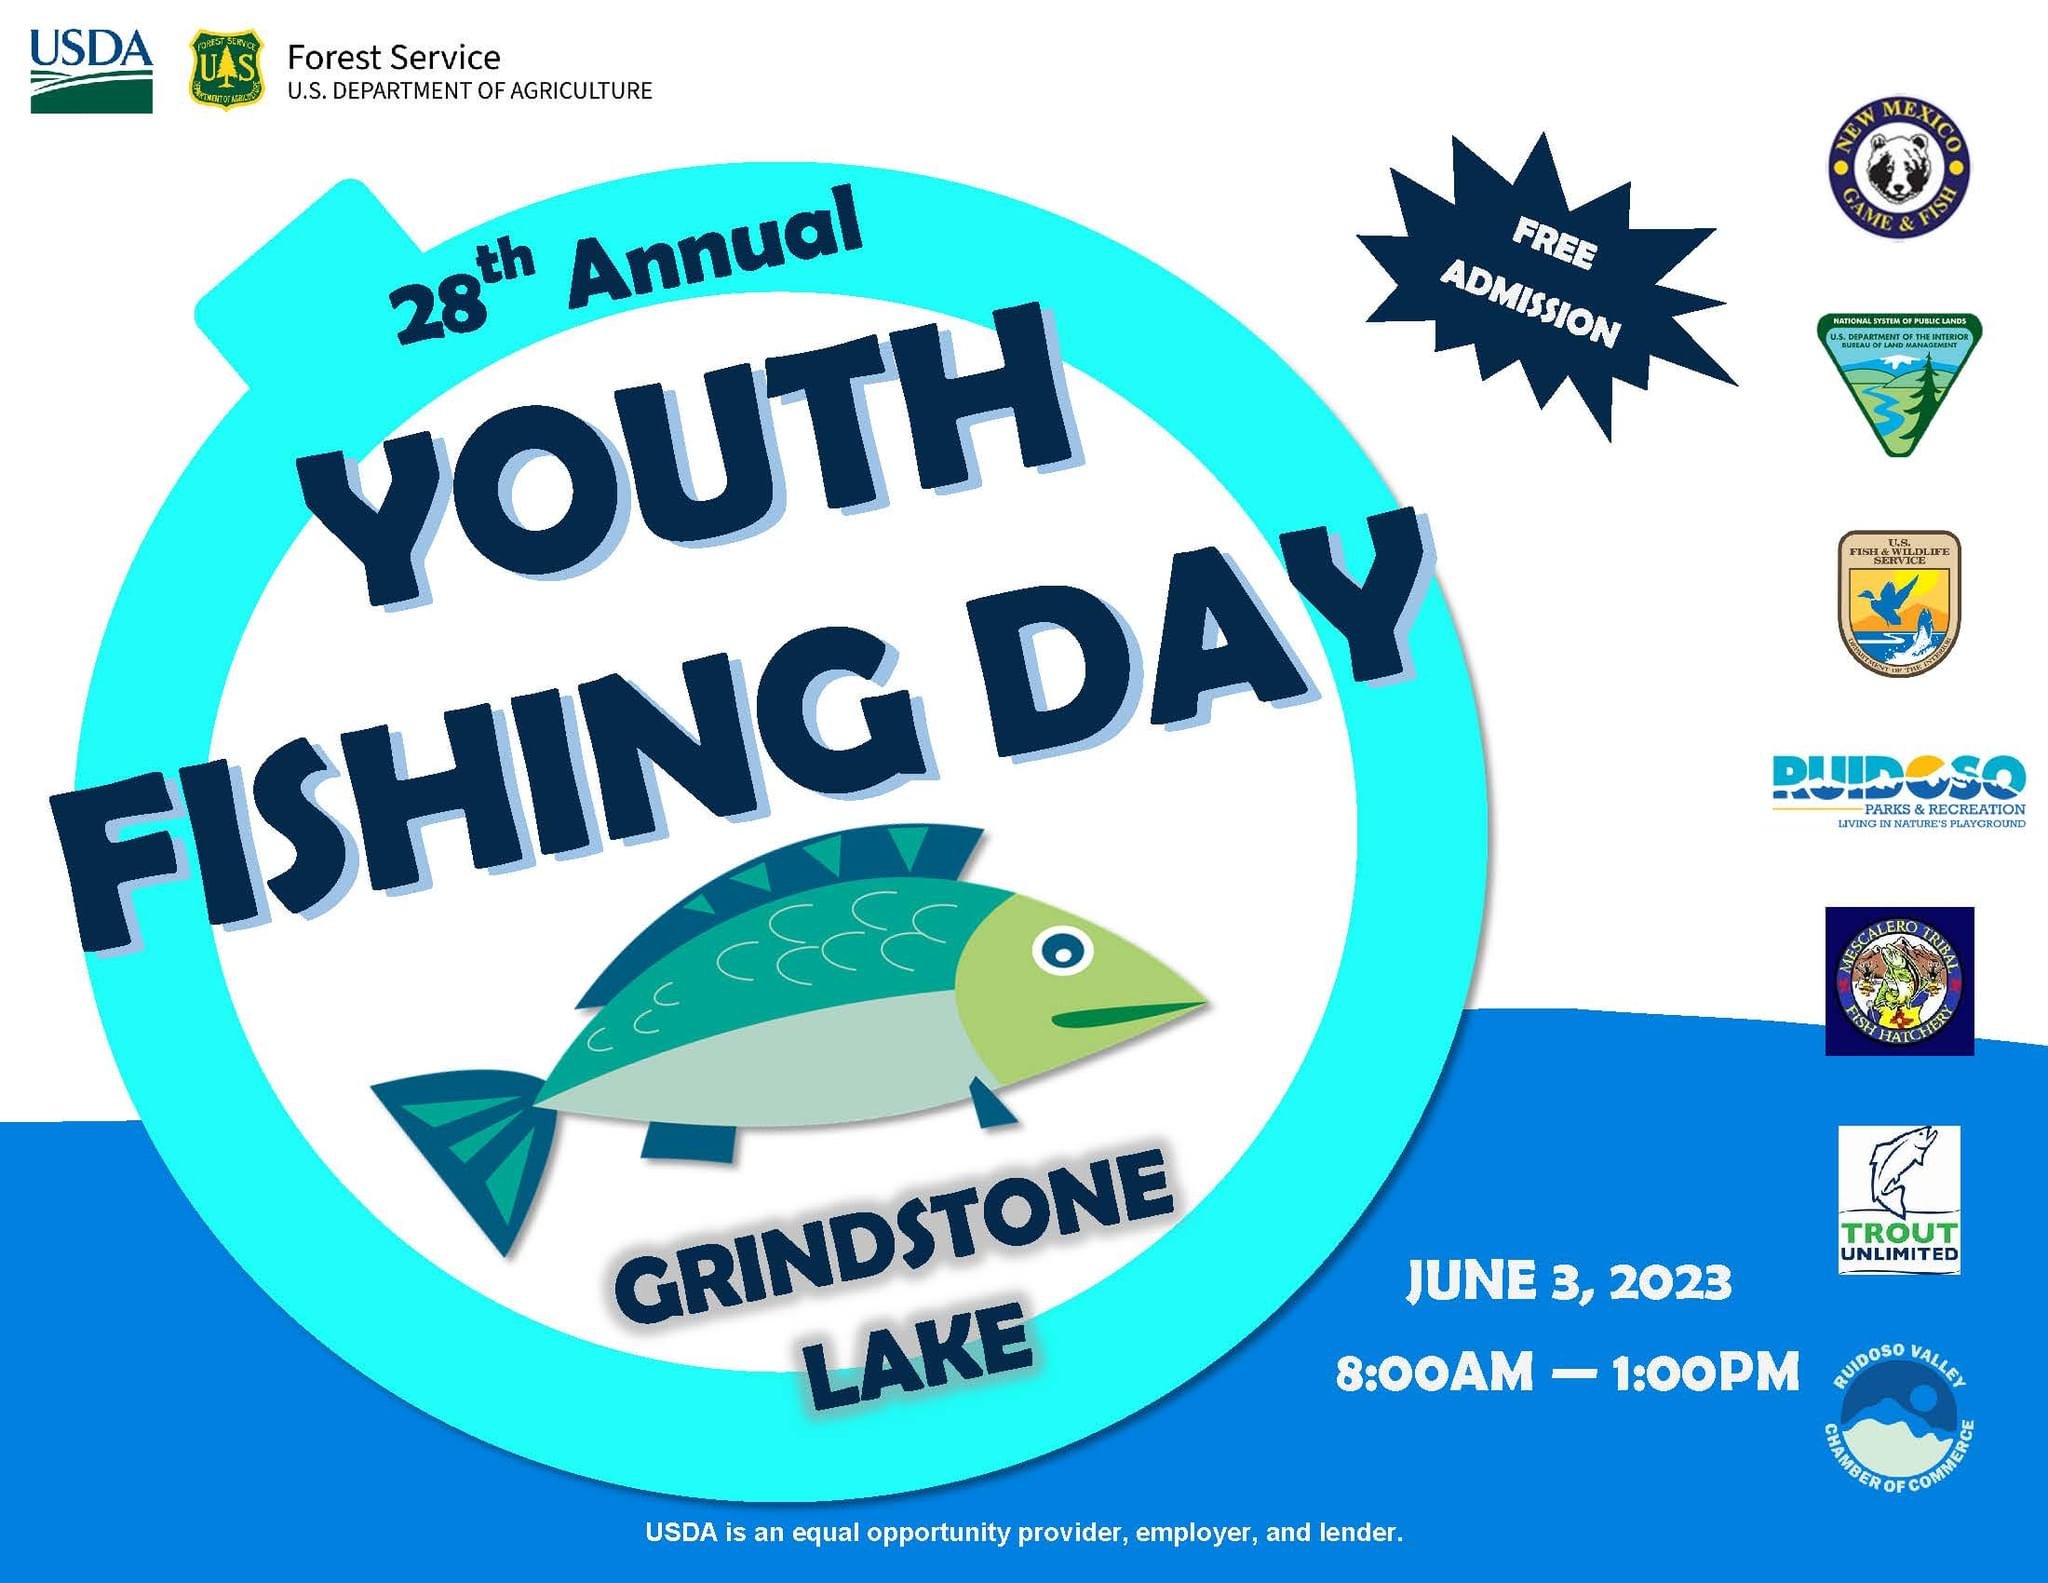 28th Annual Youth Fishing Day at Grindstone Lake — Parks & Recreation